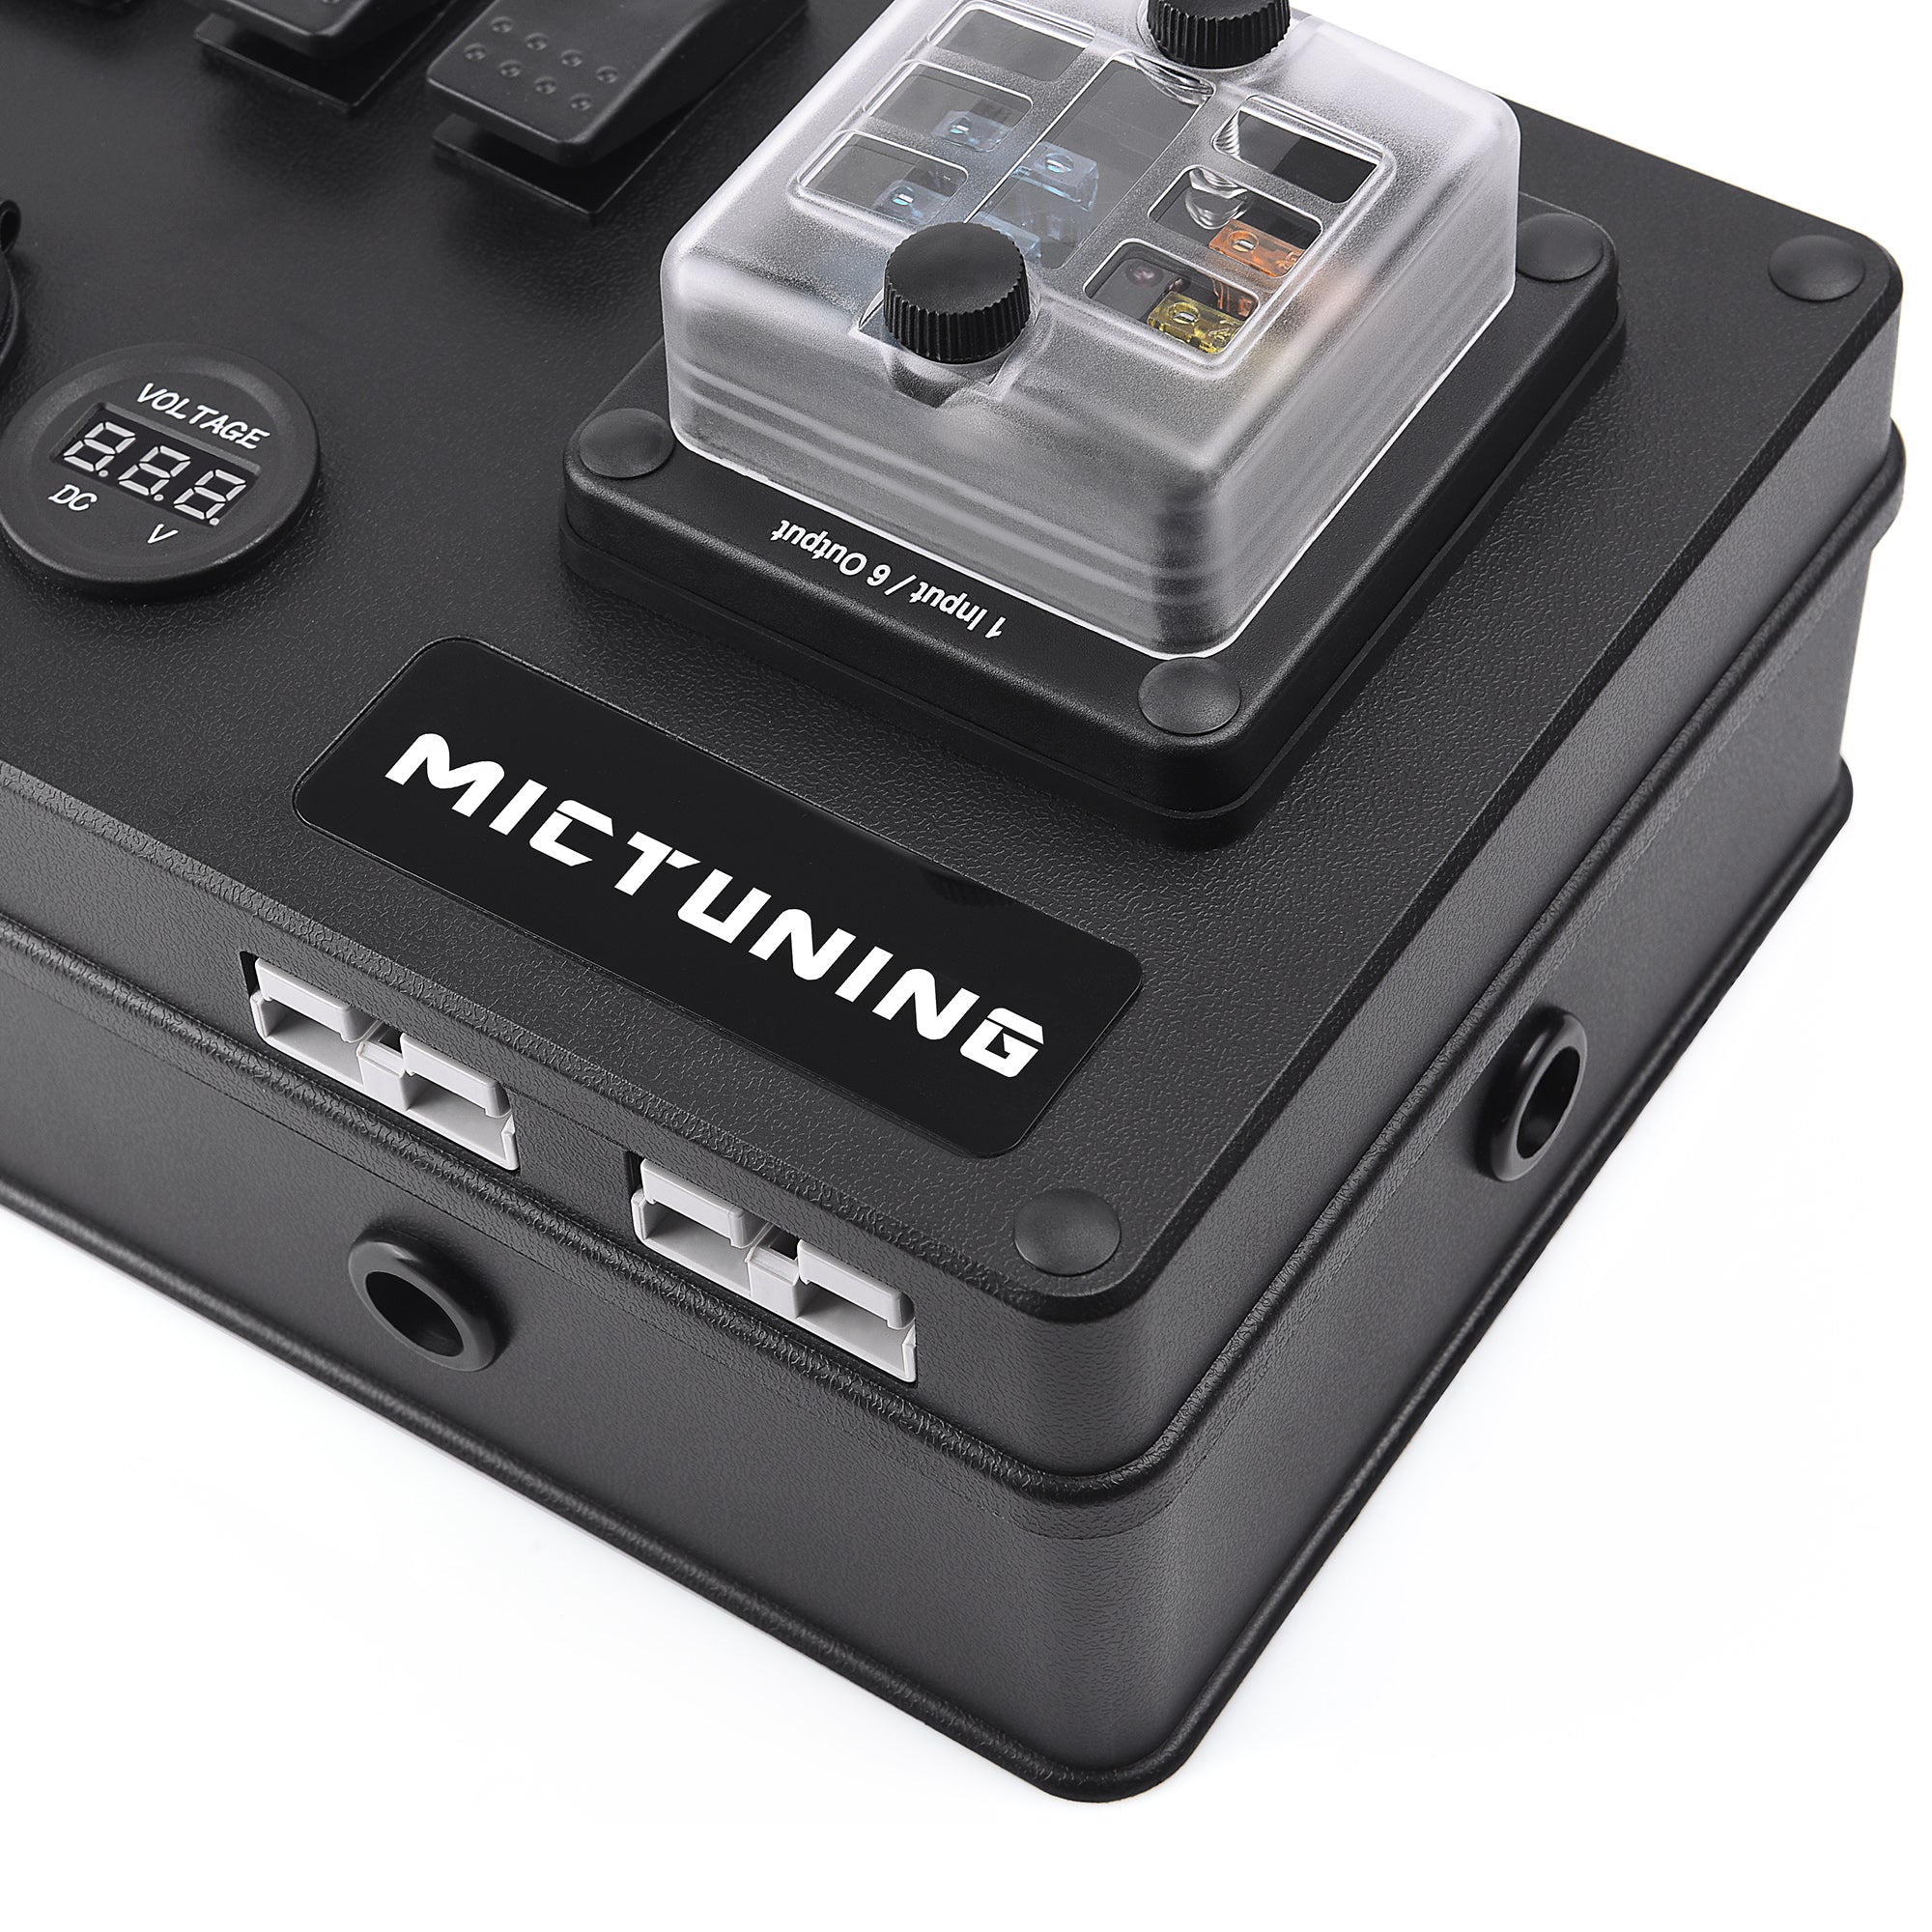 MICTUNING Power Control Box Panel with 6 Gang ON-Off Toggle Rocker Switch Digital Voltmeter Dual USB Charger Cigarette Lighter Socket Fuse Block